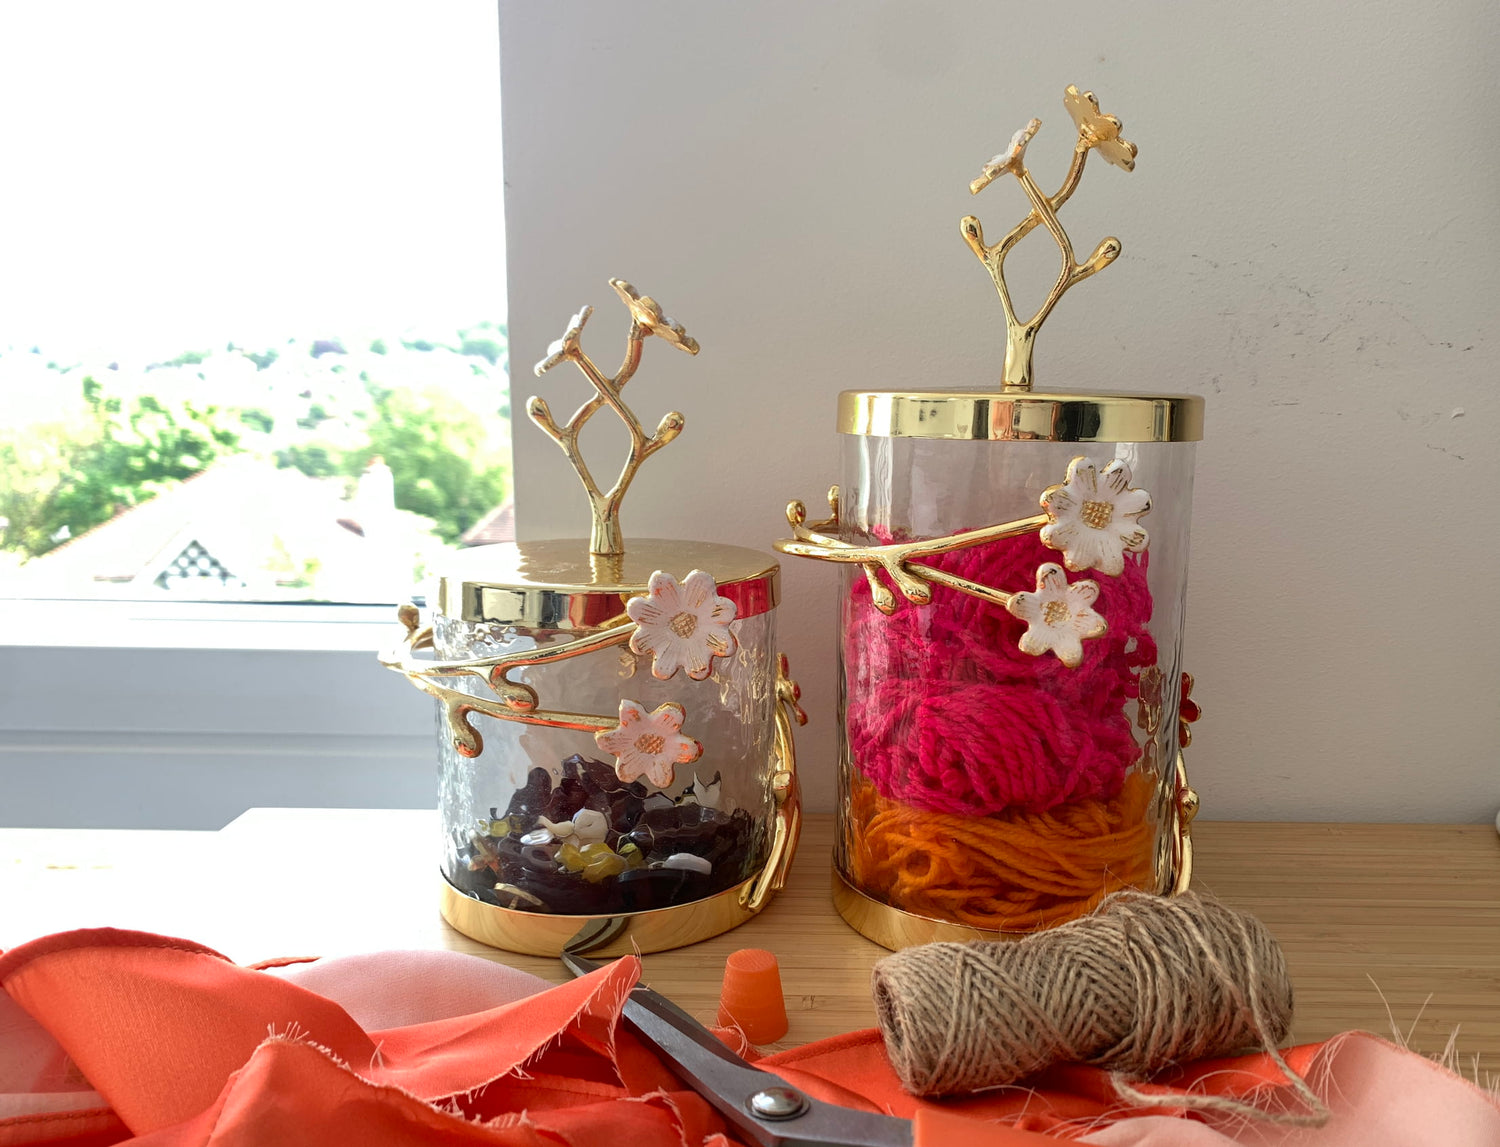 Glass jars use ideas for craft supplies